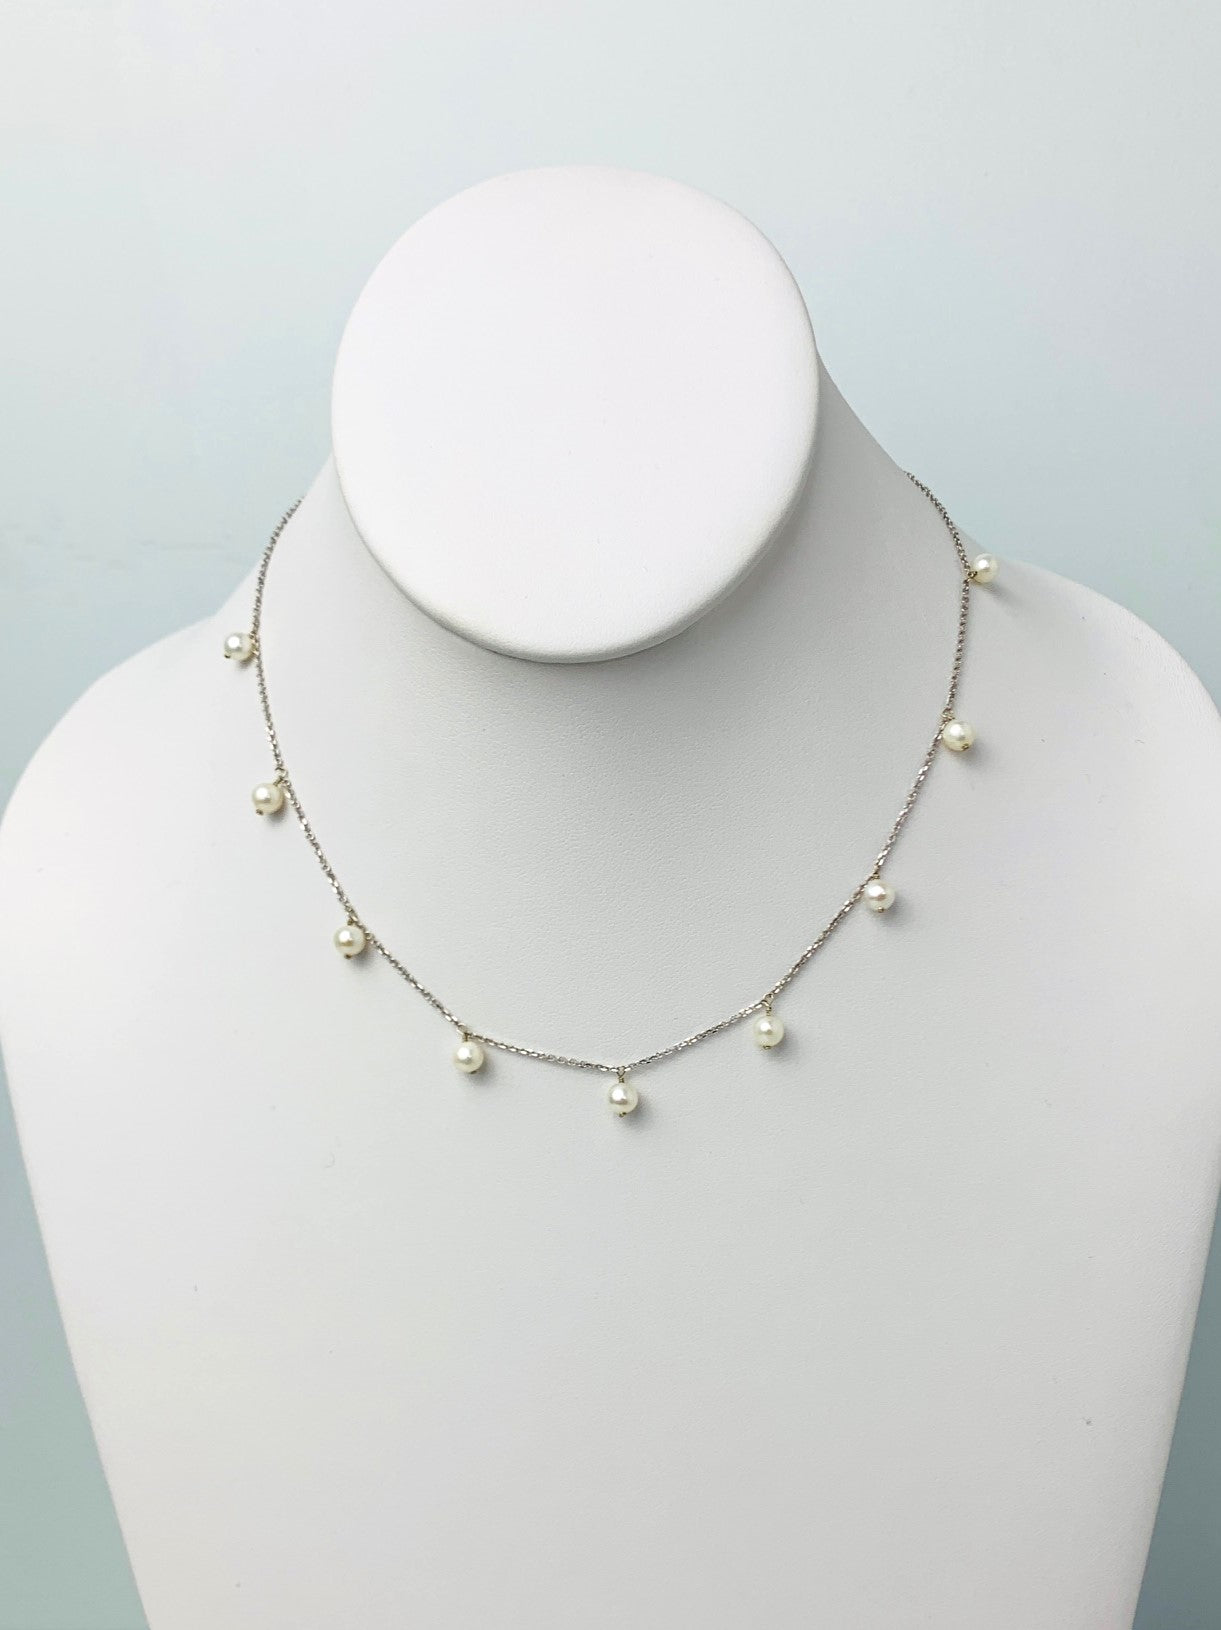 16" White 9 Station Pearl Dangly Necklace in 14KW - NCK-530-DNGPRL14W-WH-16